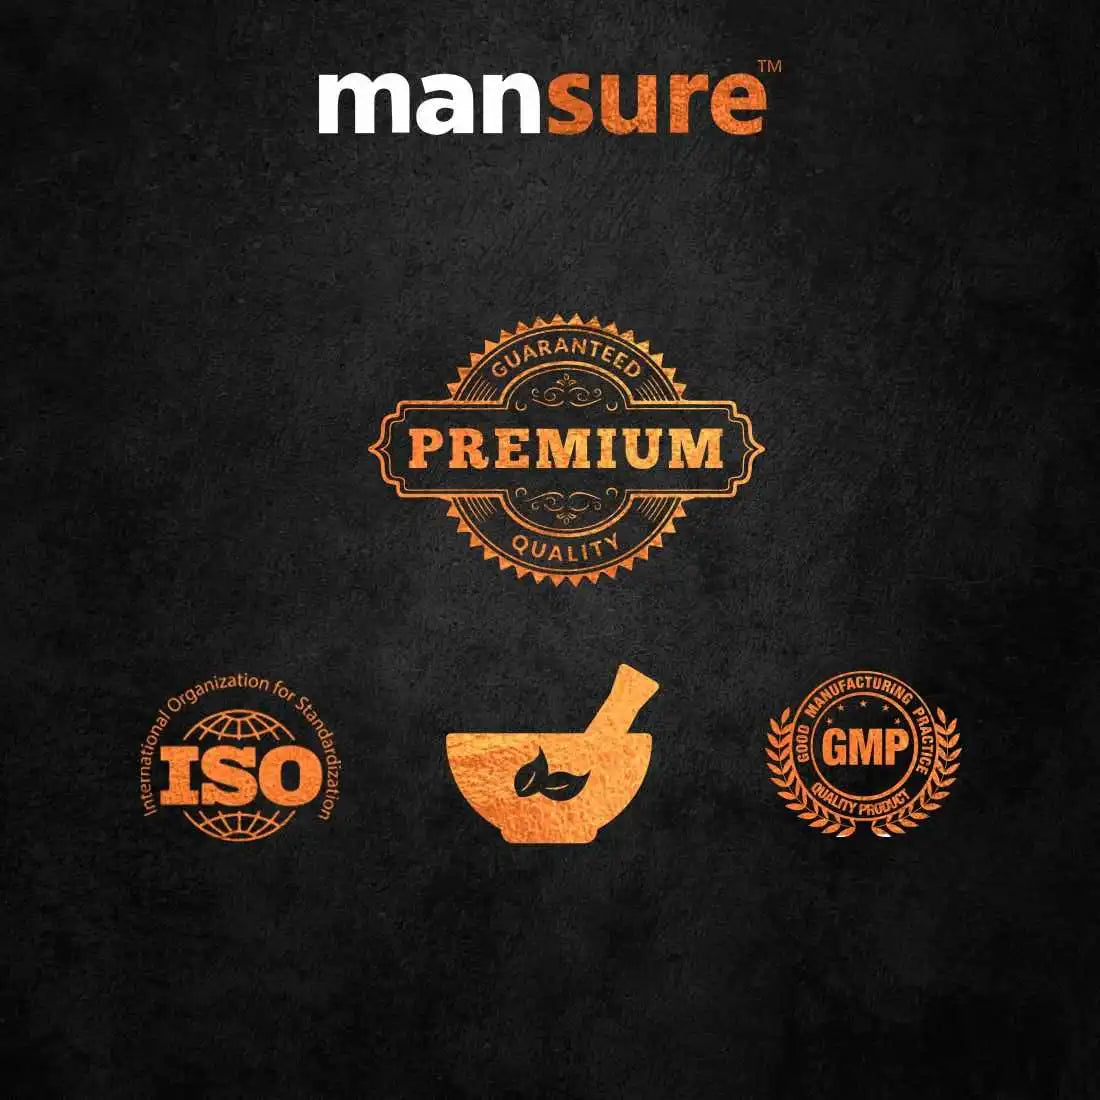 ManSure Massage Oil for Men is Top Certified Quality Product